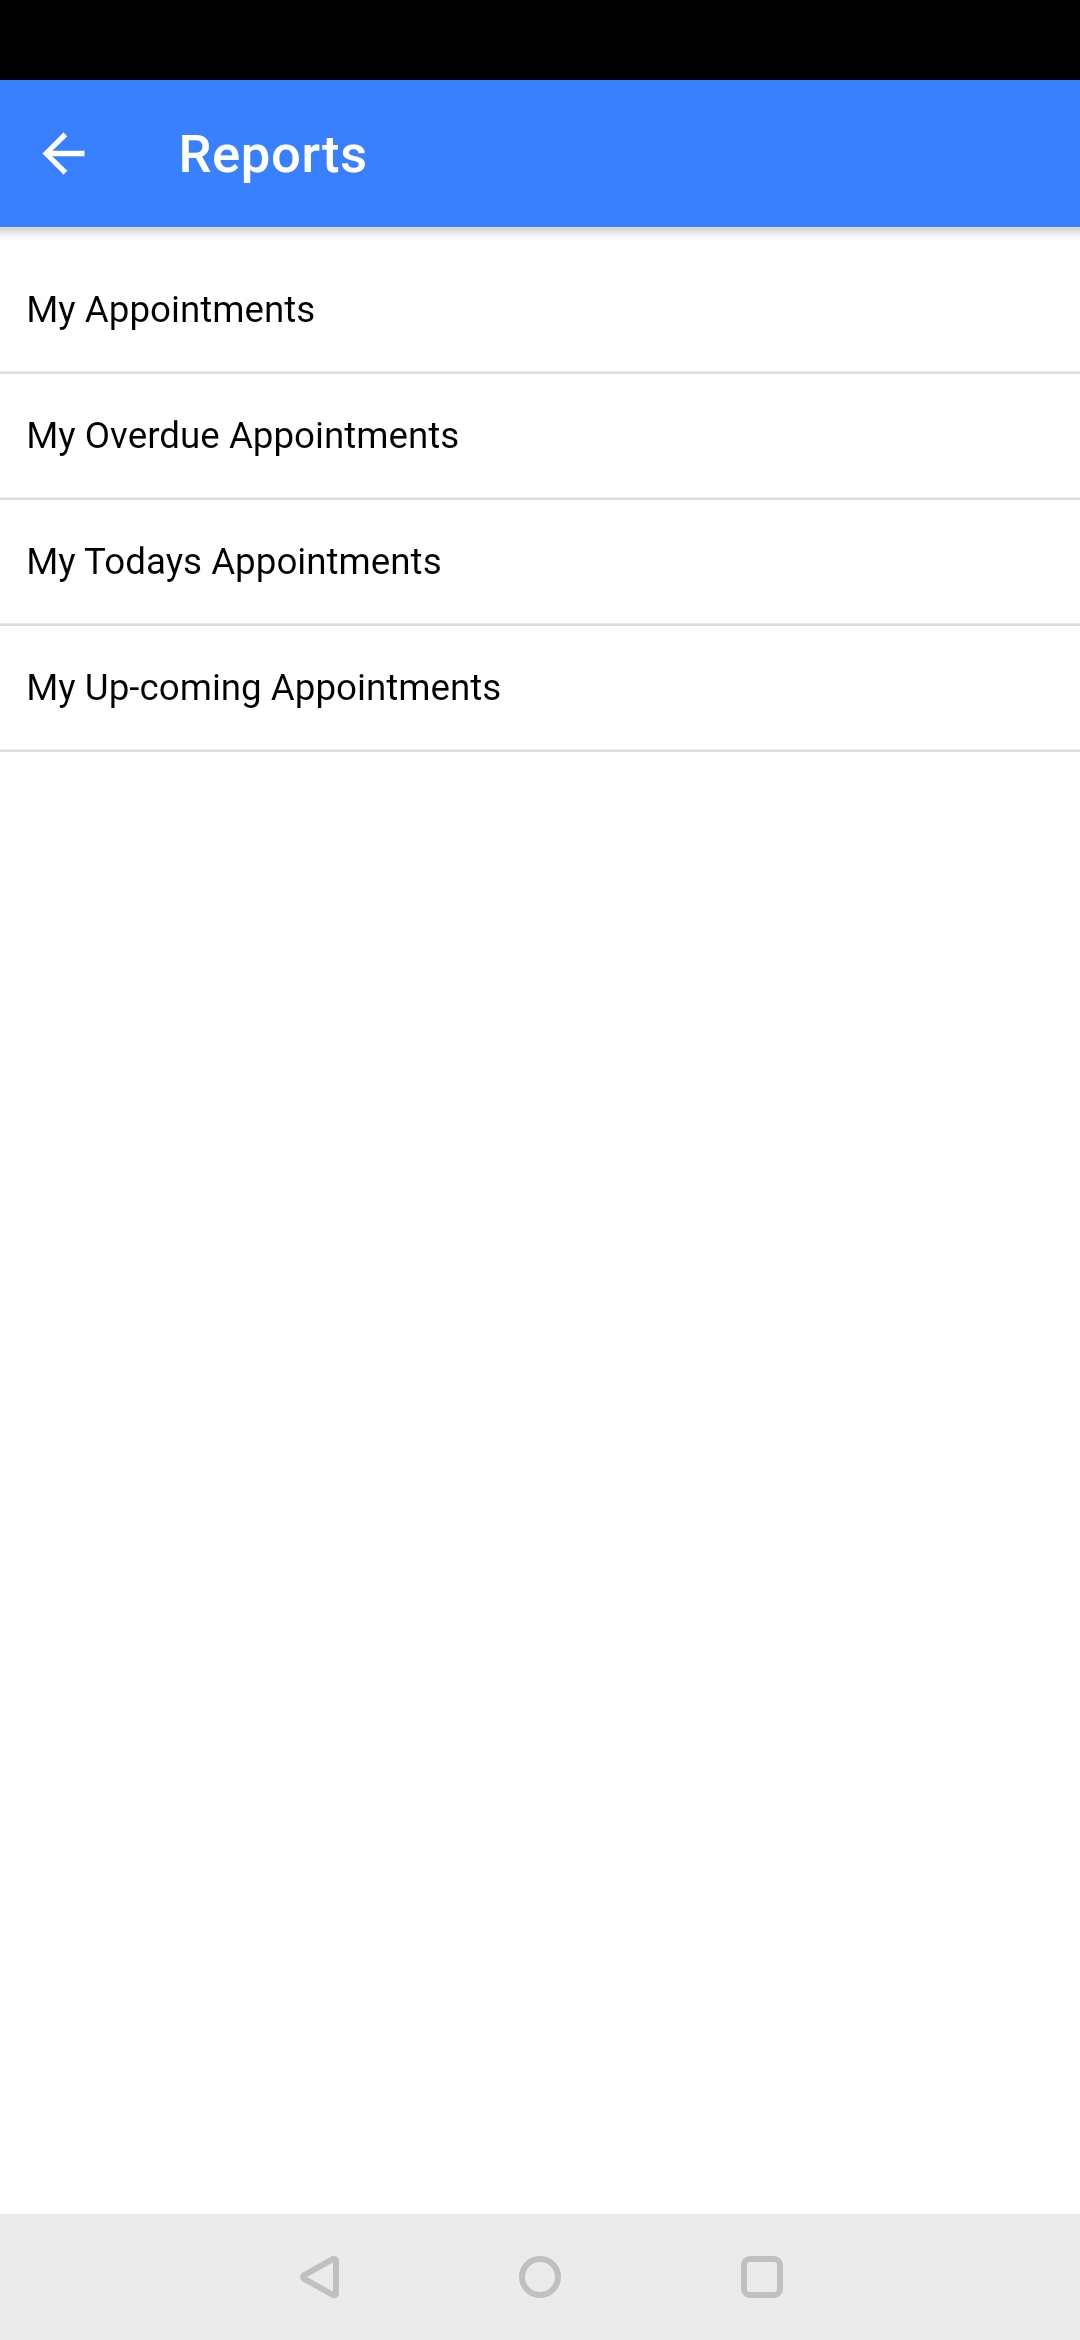 Appointment reports